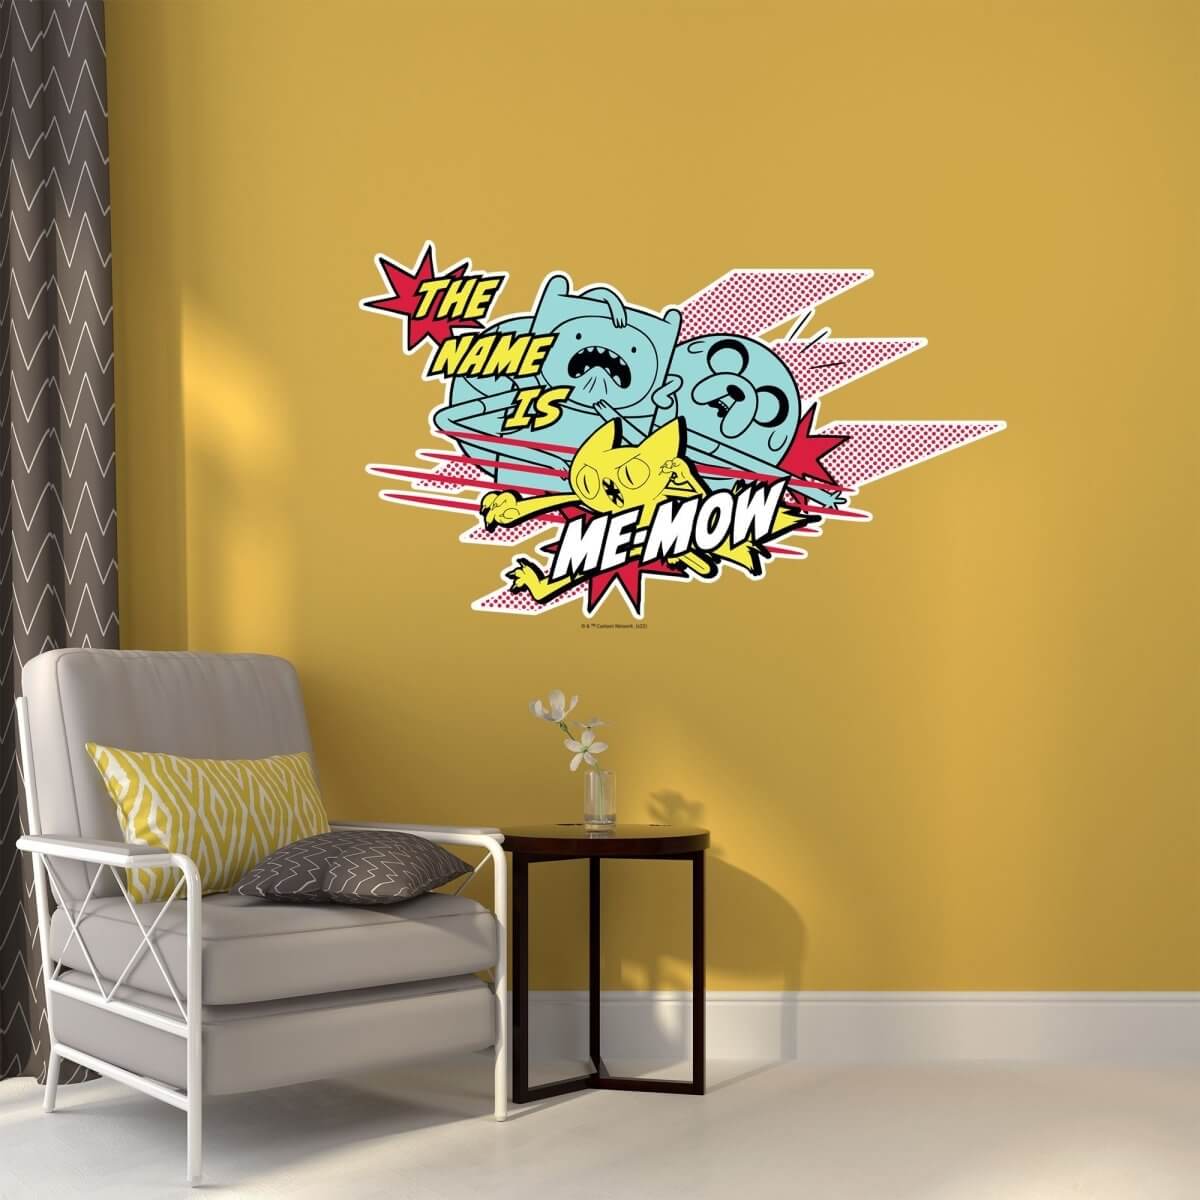 Kismet Decals Adventure Time The Name is Me-Mow Licensed Wall Sticker - Easy DIY Home & Kids Room Decor Wall Decal Art - Kismet Decals